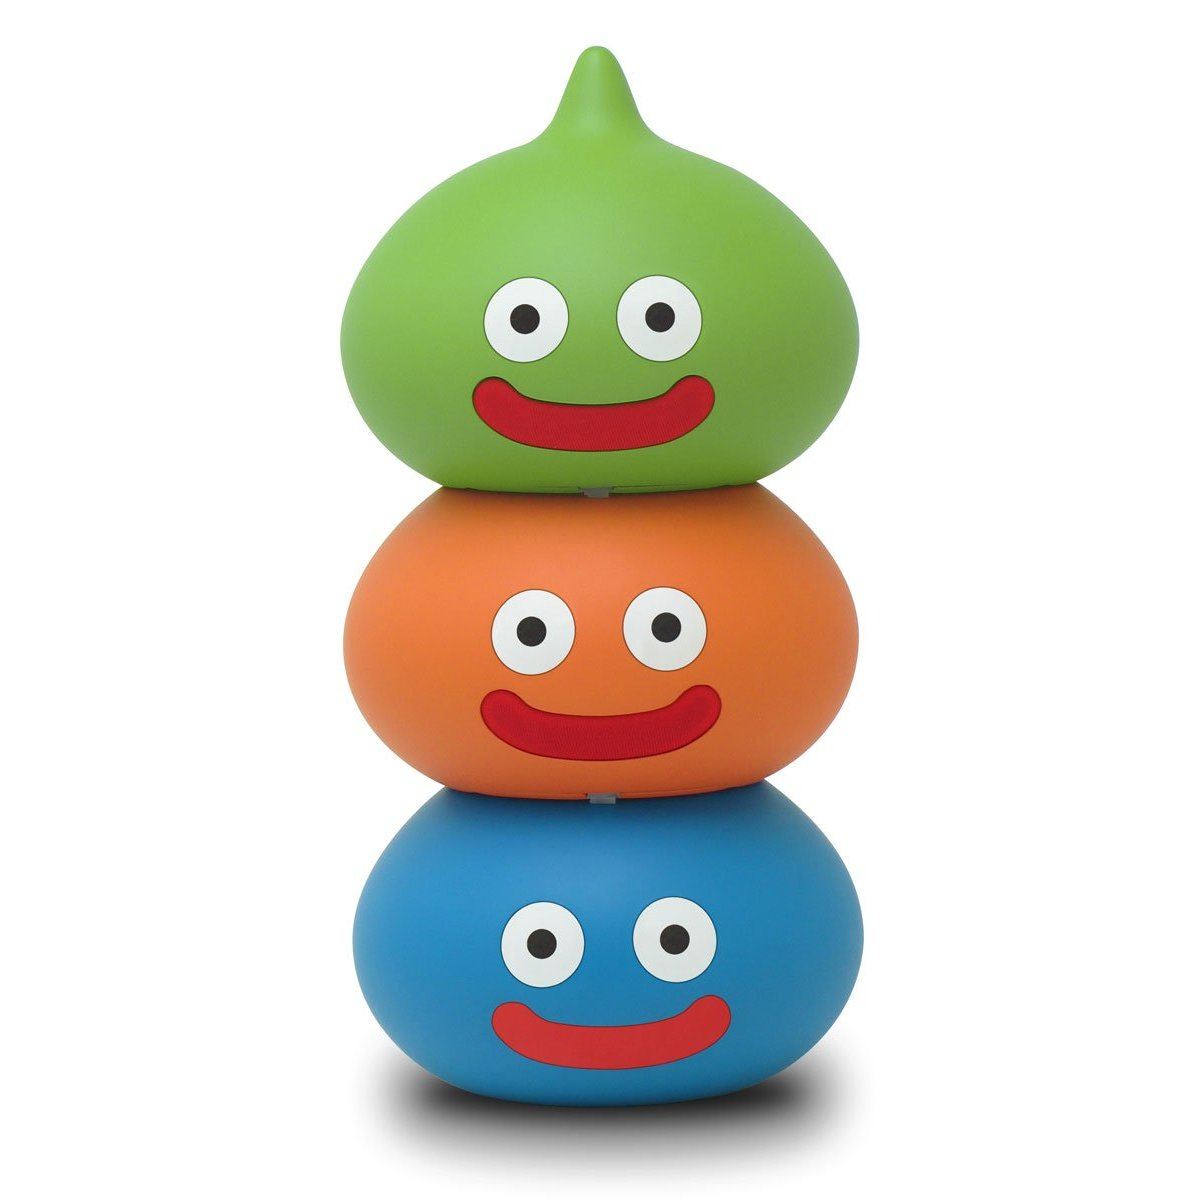 Special Dragon Quest Slime-Shaped Controller Announced for 